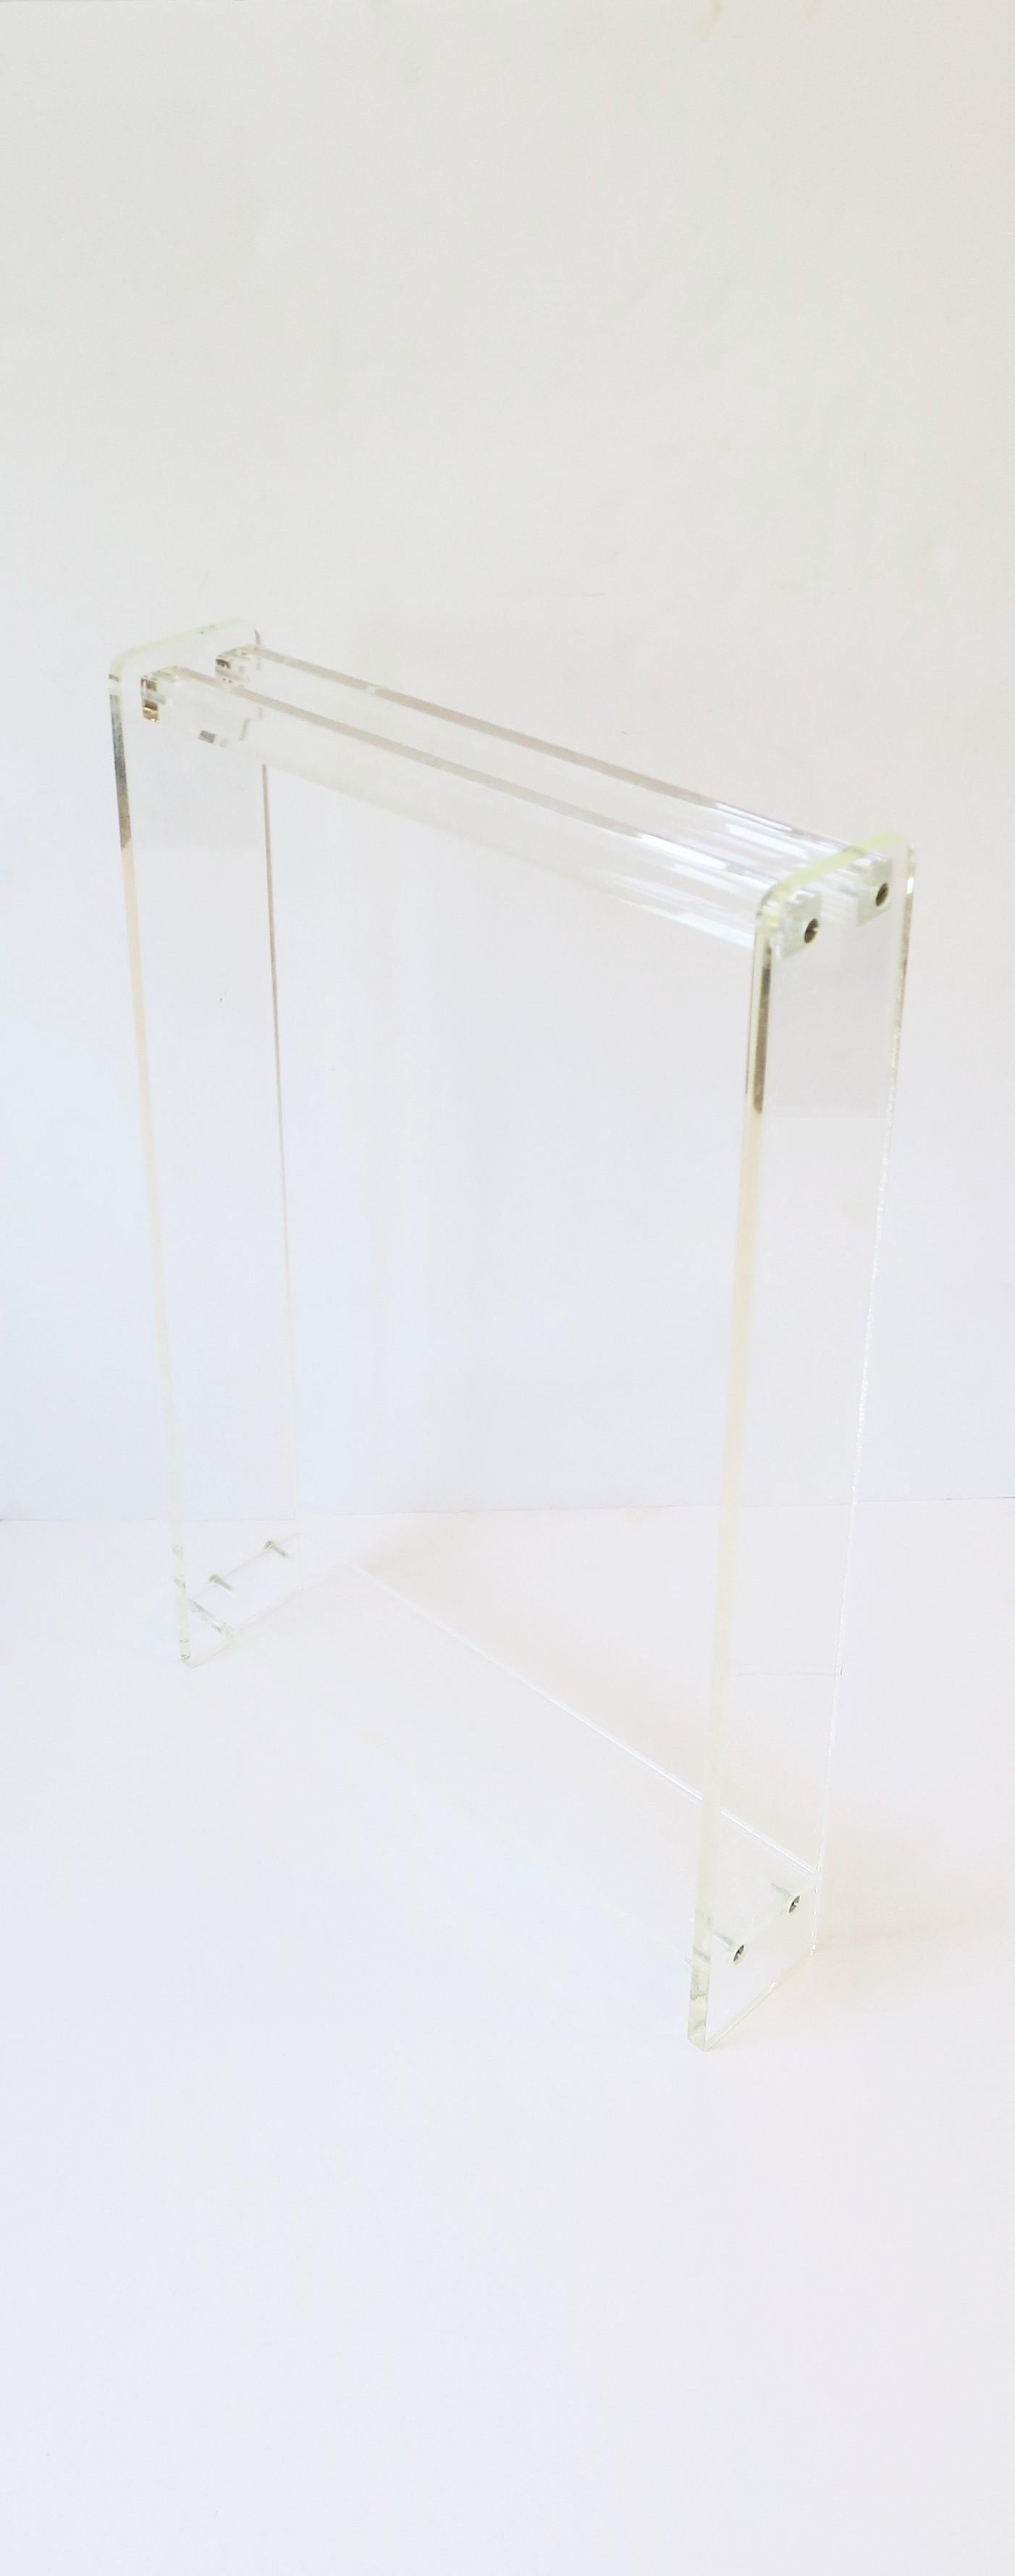 A Lucite bathroom towel rack or stand, circa late-20th century. Towel rods are 1